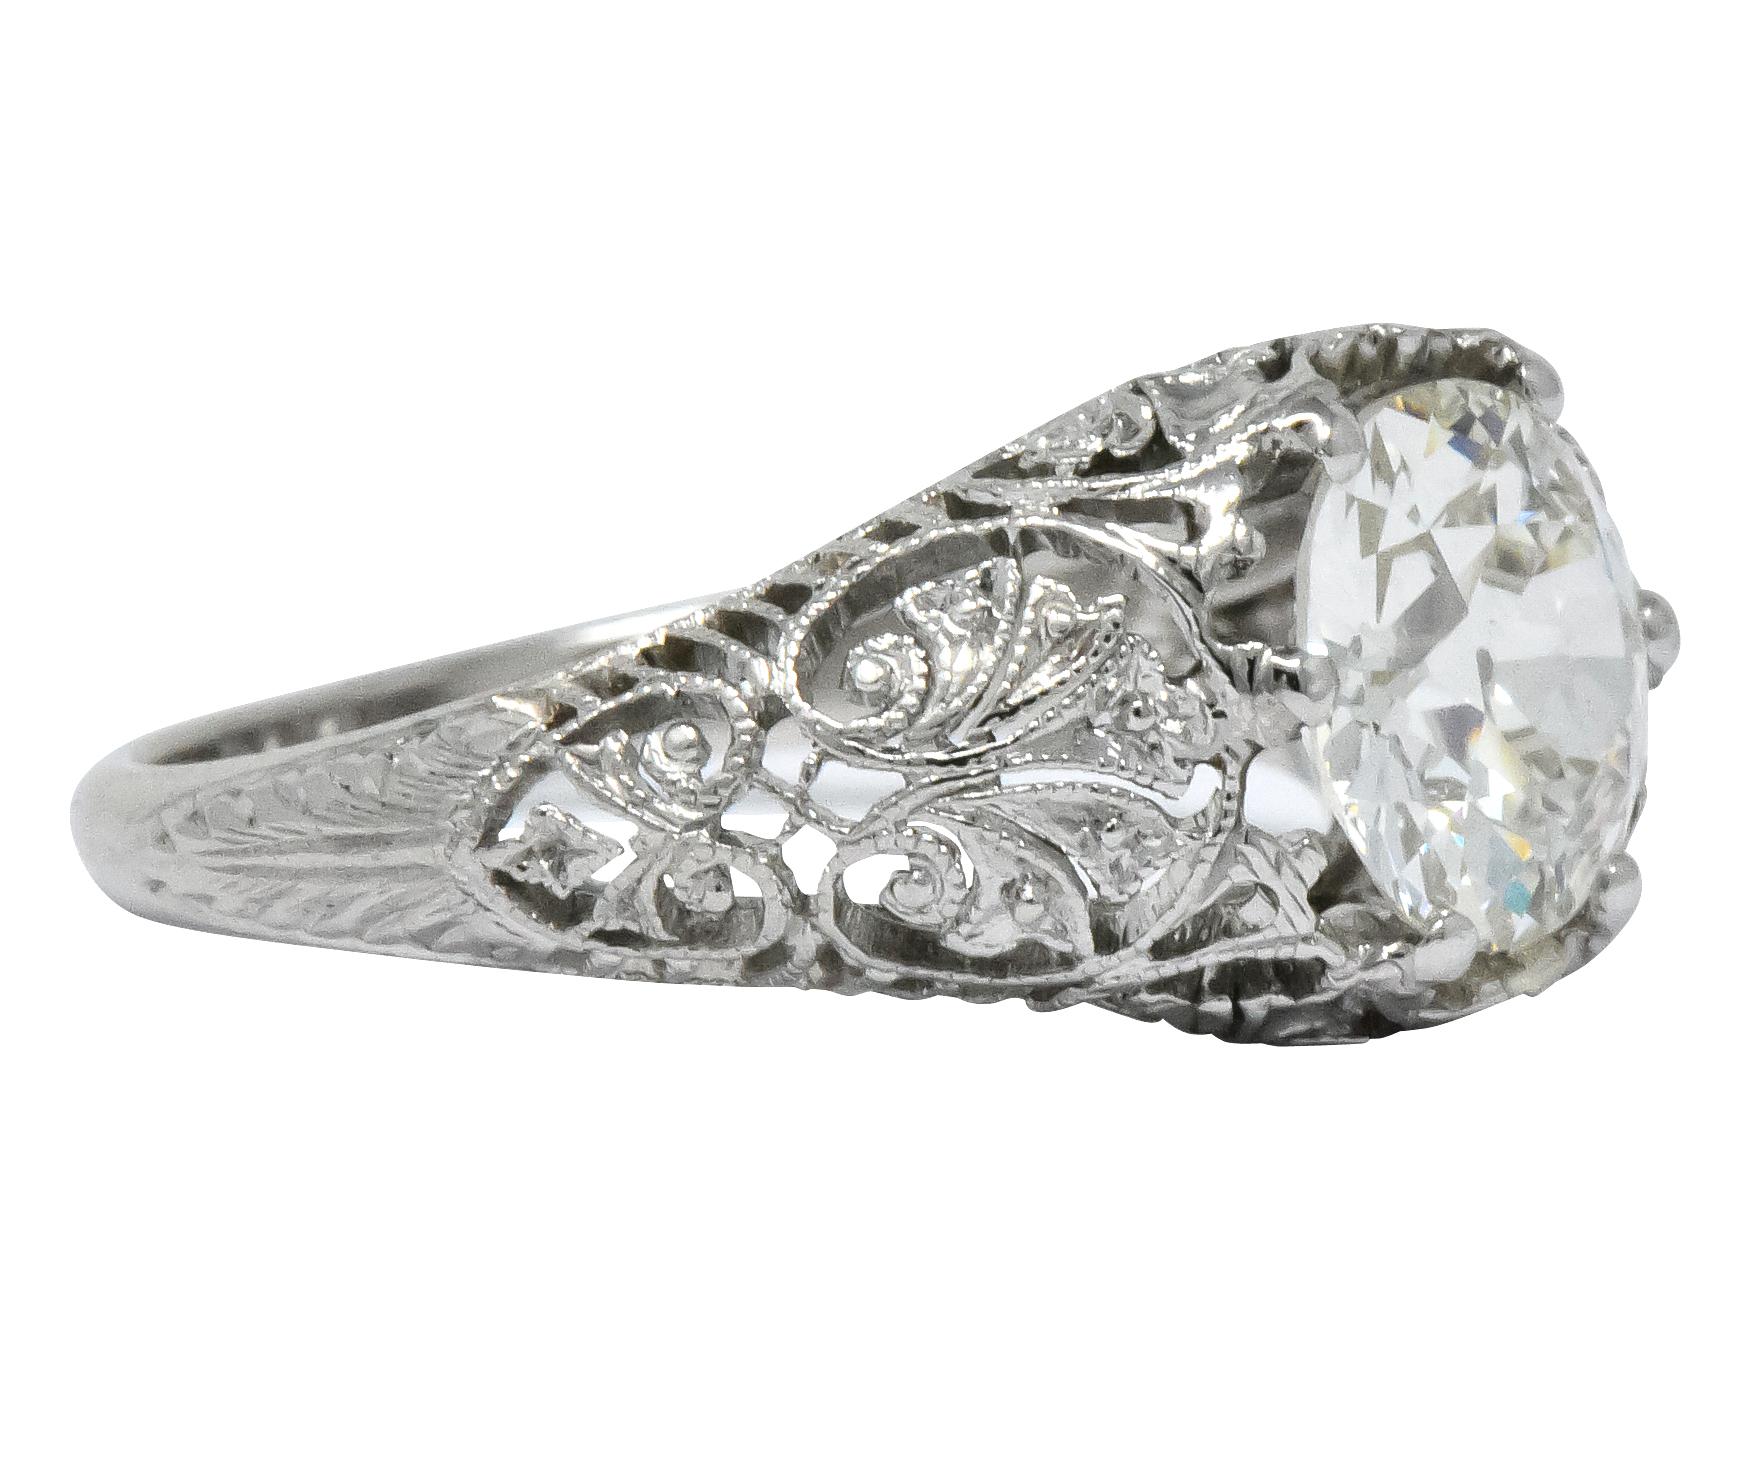 Centering an old European brilliant cut diamond weighing 1.25 carats, K color and VS2 clarity

Stylized foliate accompanied by ornately pieced shoulders and gallery, with partially engraved shank

Inscribed with initials

Tested as platinum

Ring